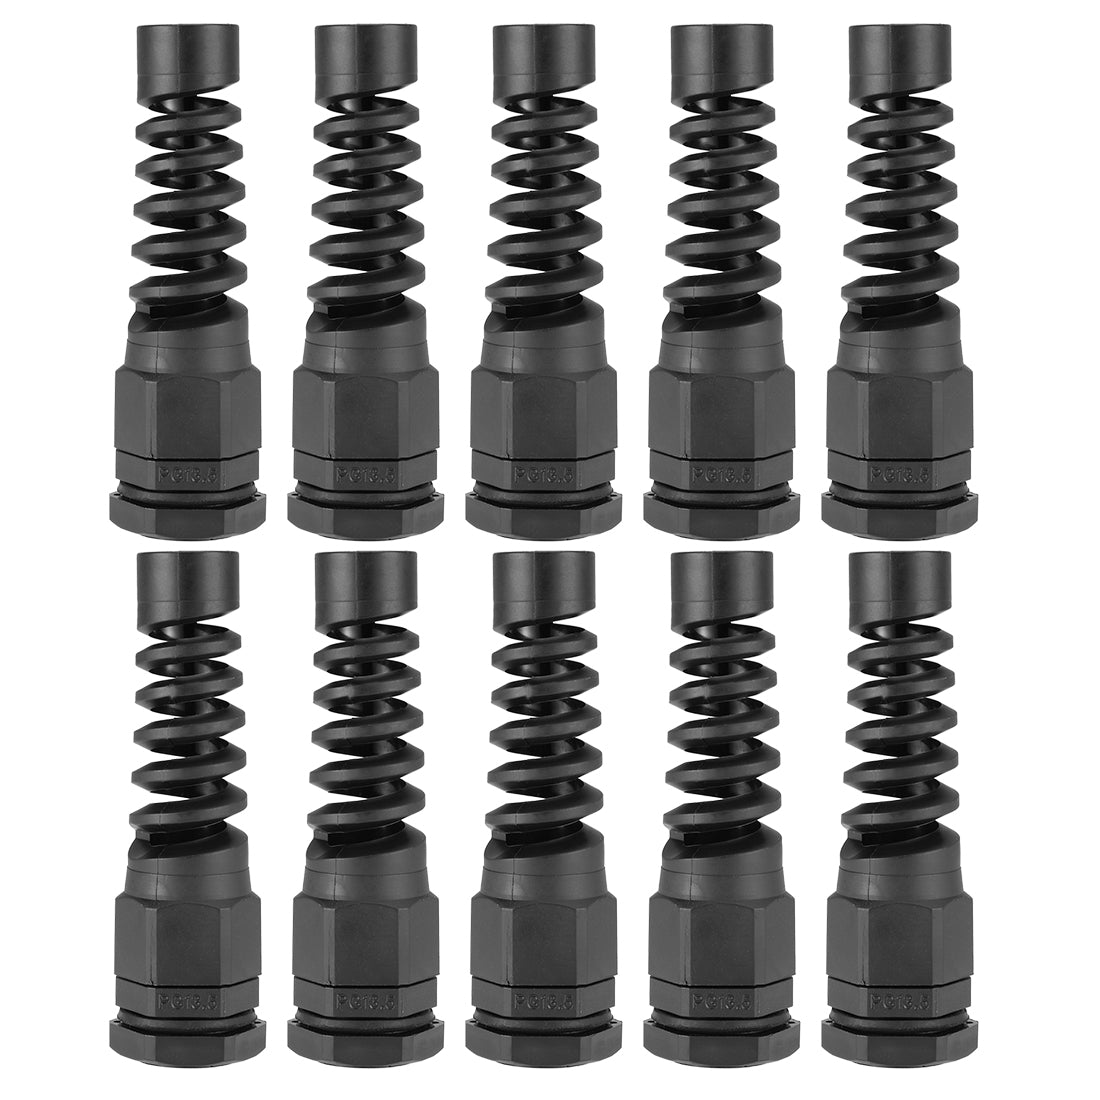 uxcell Uxcell PG13.5 Cable Gland 6mm-11mm Wire Hole Waterproof Nylon Joint Adjustable Locknut with Strain Relief Black 10pcs